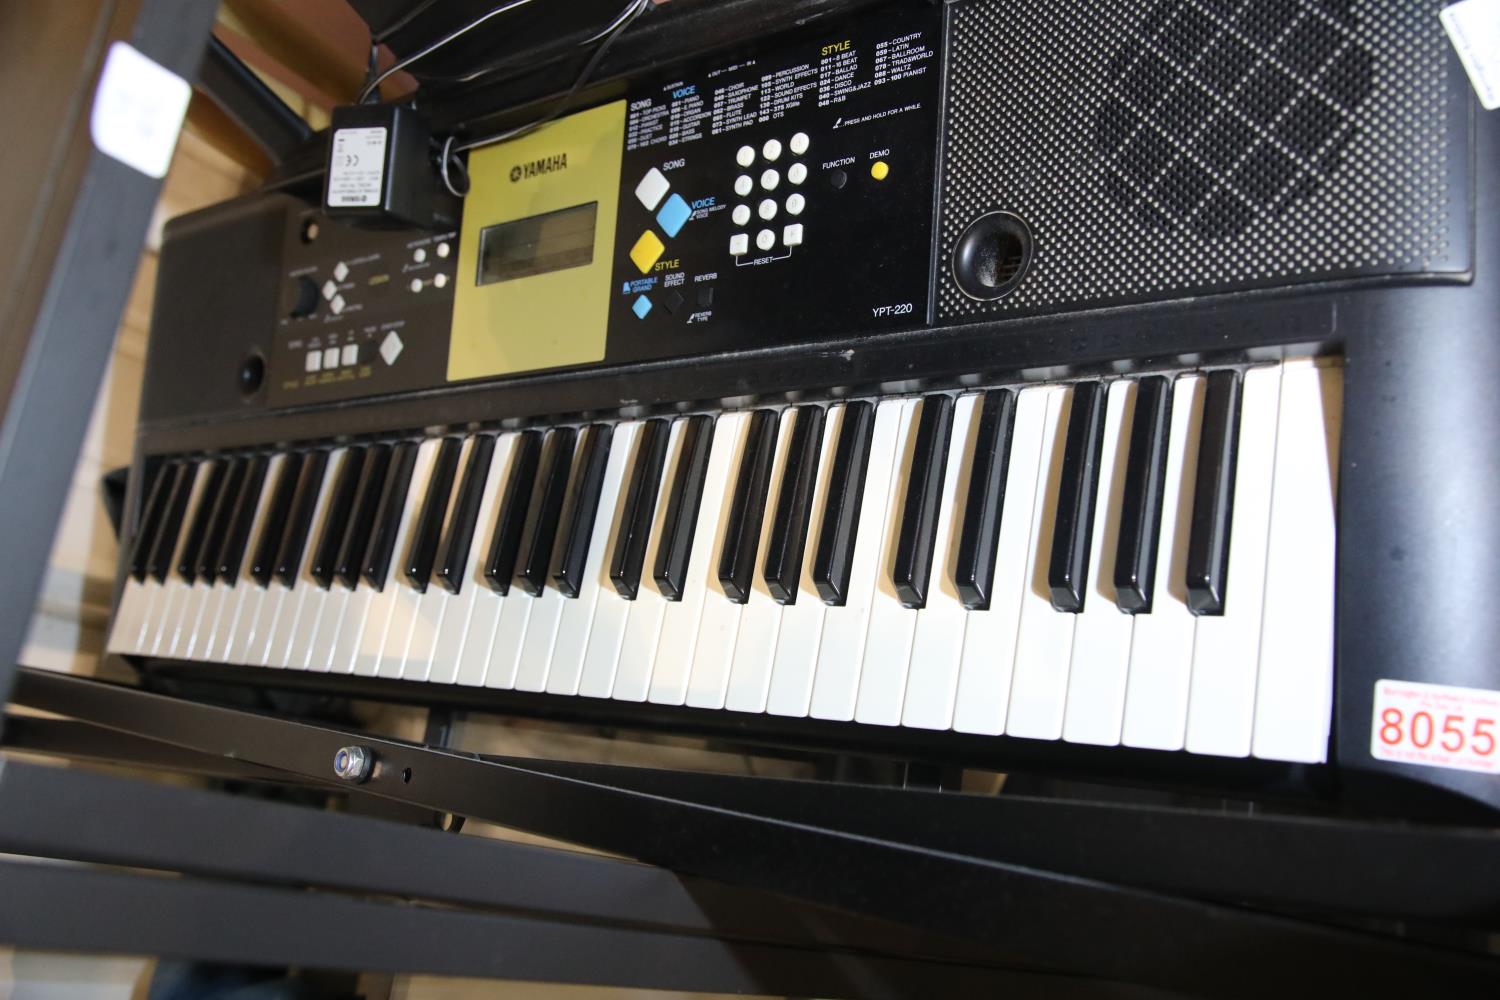 Yamaha digital keyboard YPT-220 with stand and power lead. Not available for in-house P&P, contact